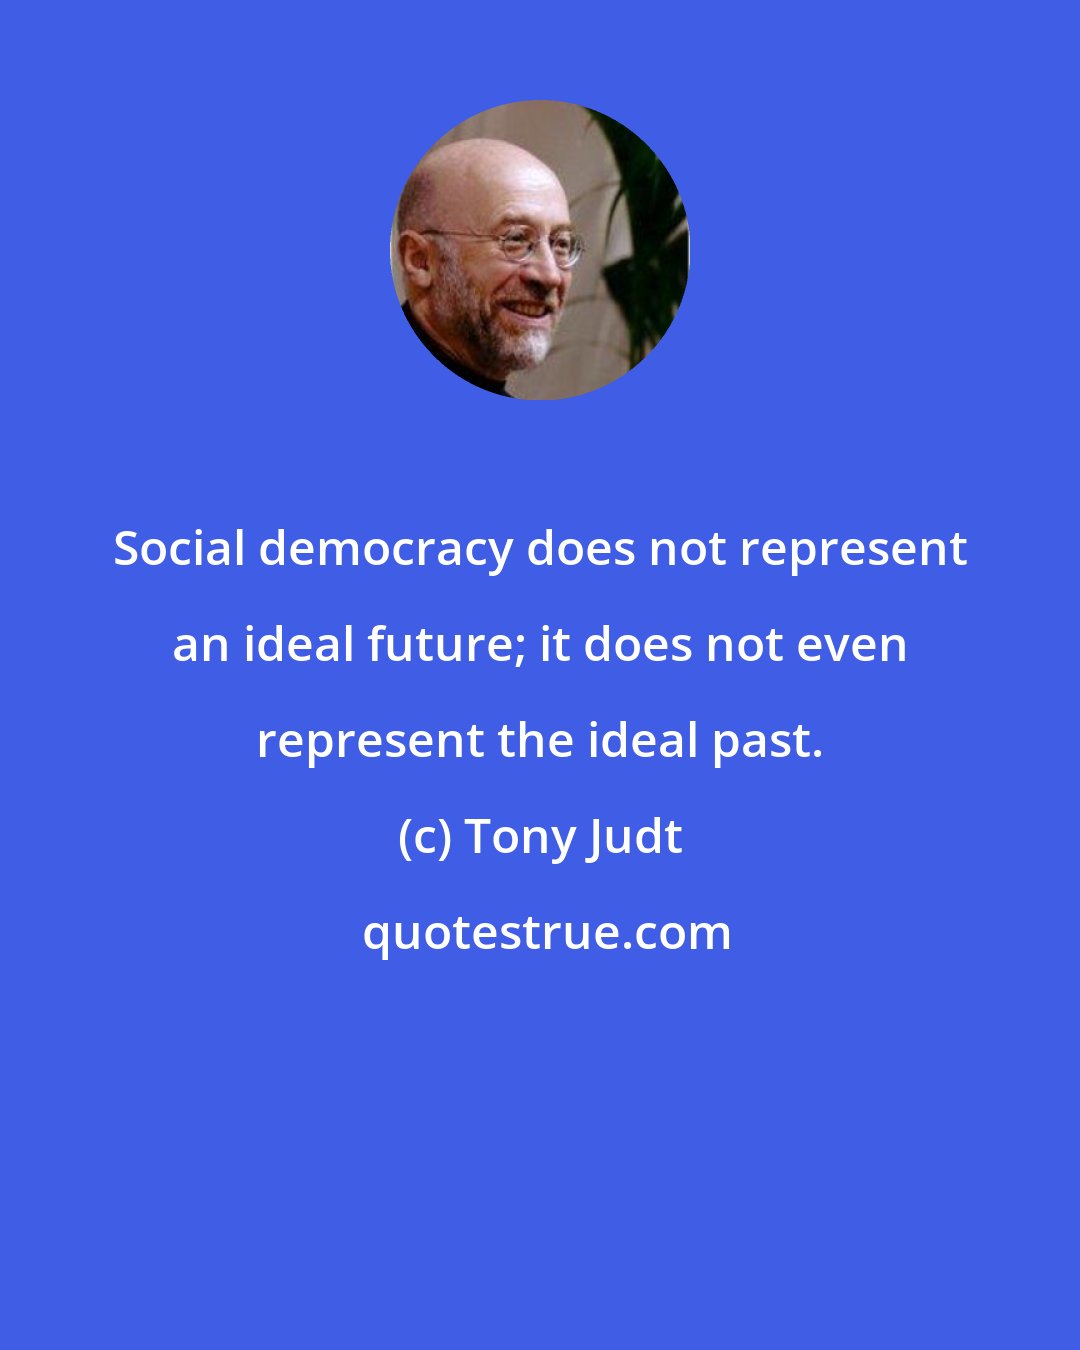 Tony Judt: Social democracy does not represent an ideal future; it does not even represent the ideal past.